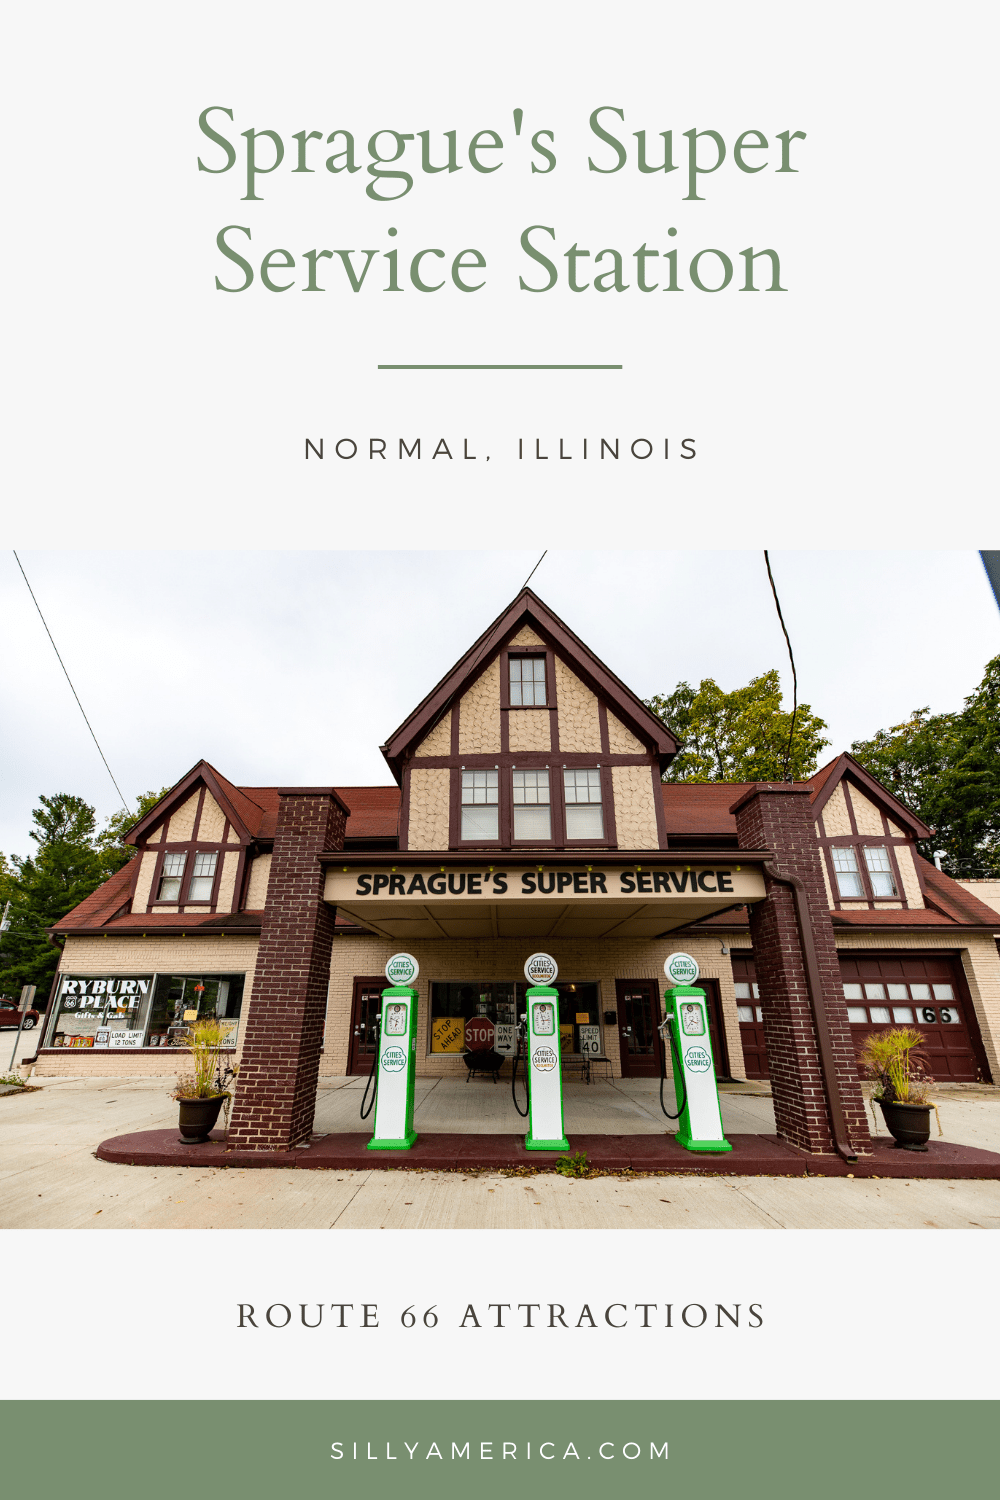 You might say that this Route 66 road trip stop is pretty super: Sprague's Super Service Station in Normal, Illinois. Visit this roadside attraction on an Illinois Route 66 road trip - add it to your bucket list and travel itinerary!  #RoadTrips #RoadTripStop #Route66 #Route66RoadTrip #IllinoisRoute66 #Illinois #IllinoisRoadTrip #IllinoisRoadsideAttractions #RoadsideAttractions #RoadsideAttraction #RoadsideAmerica #RoadTrip